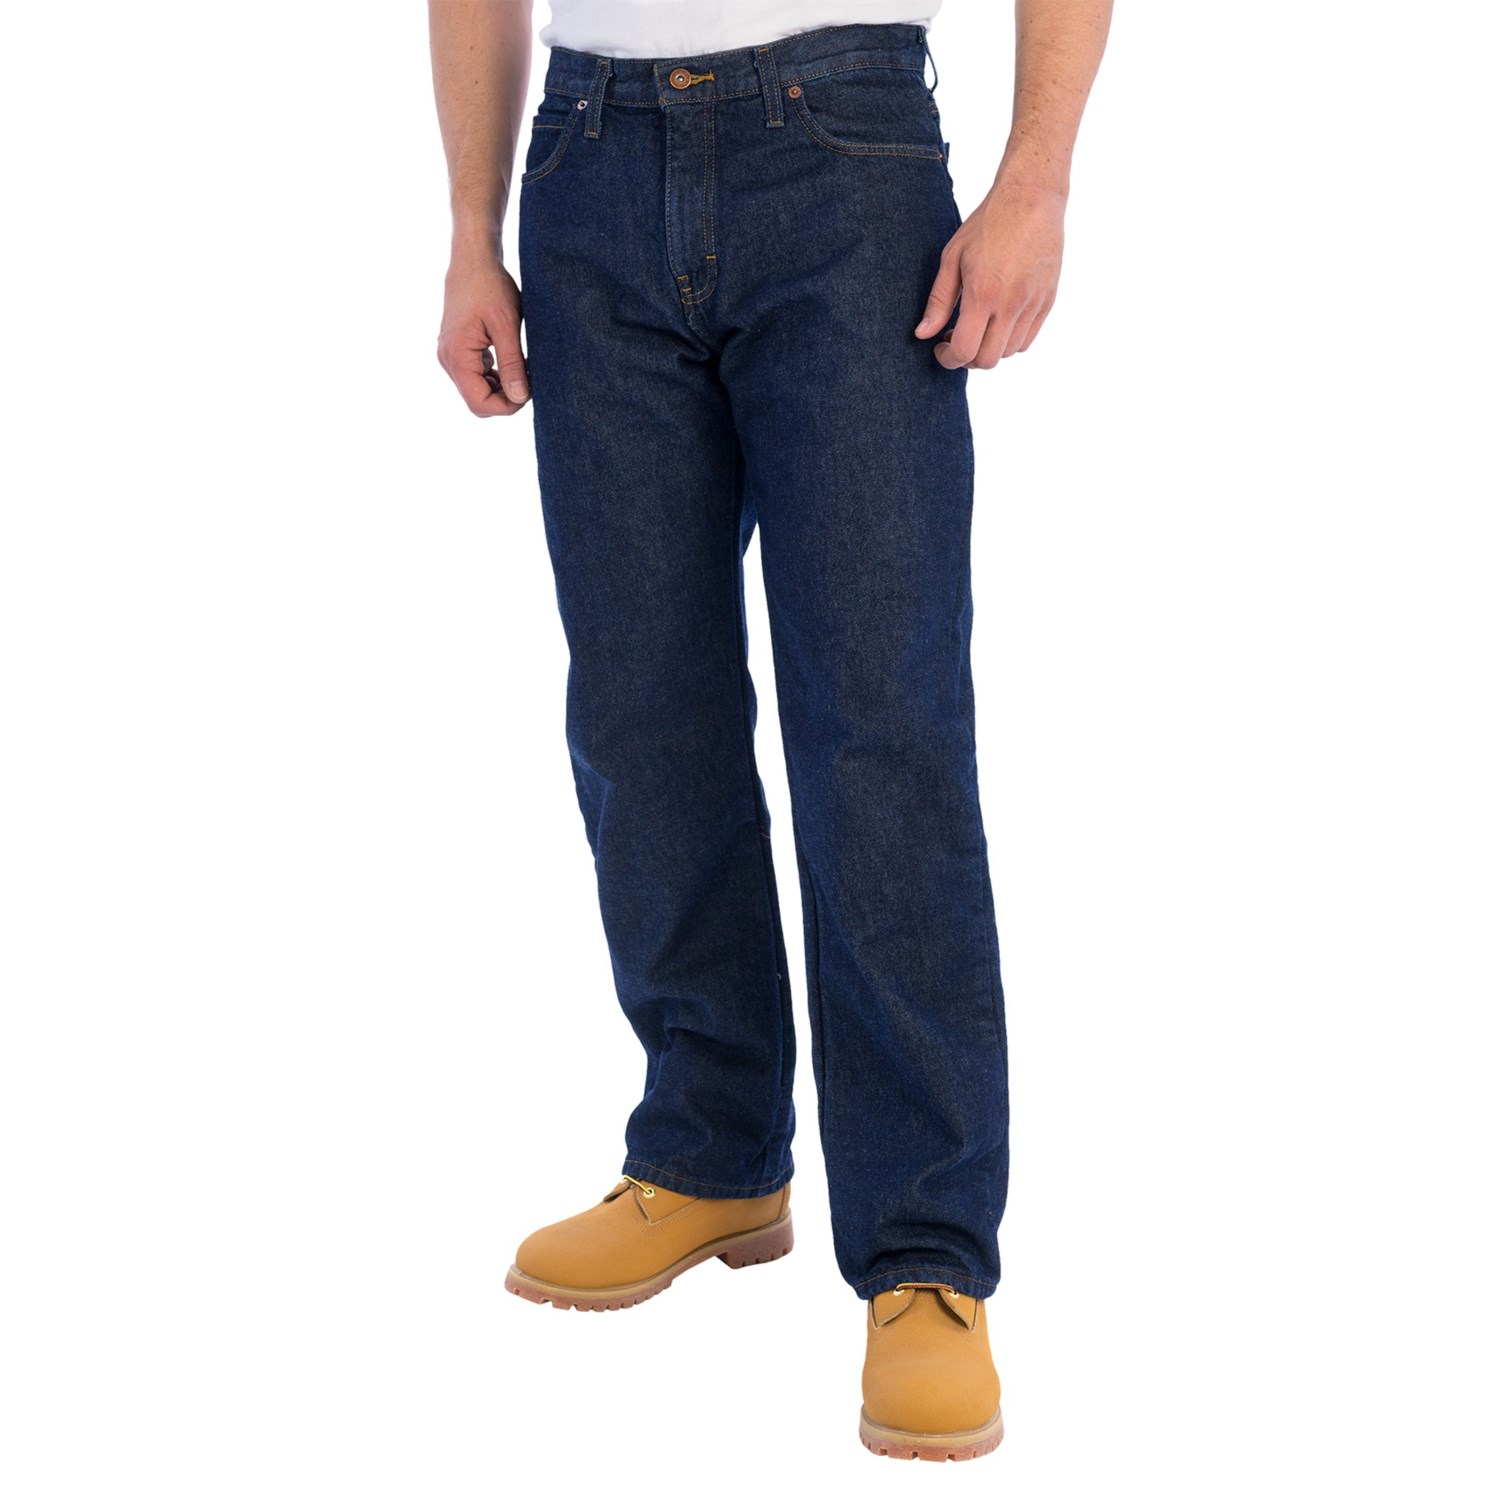 Dickies Flannel-Lined Work Jeans (For Men) - Save 65%